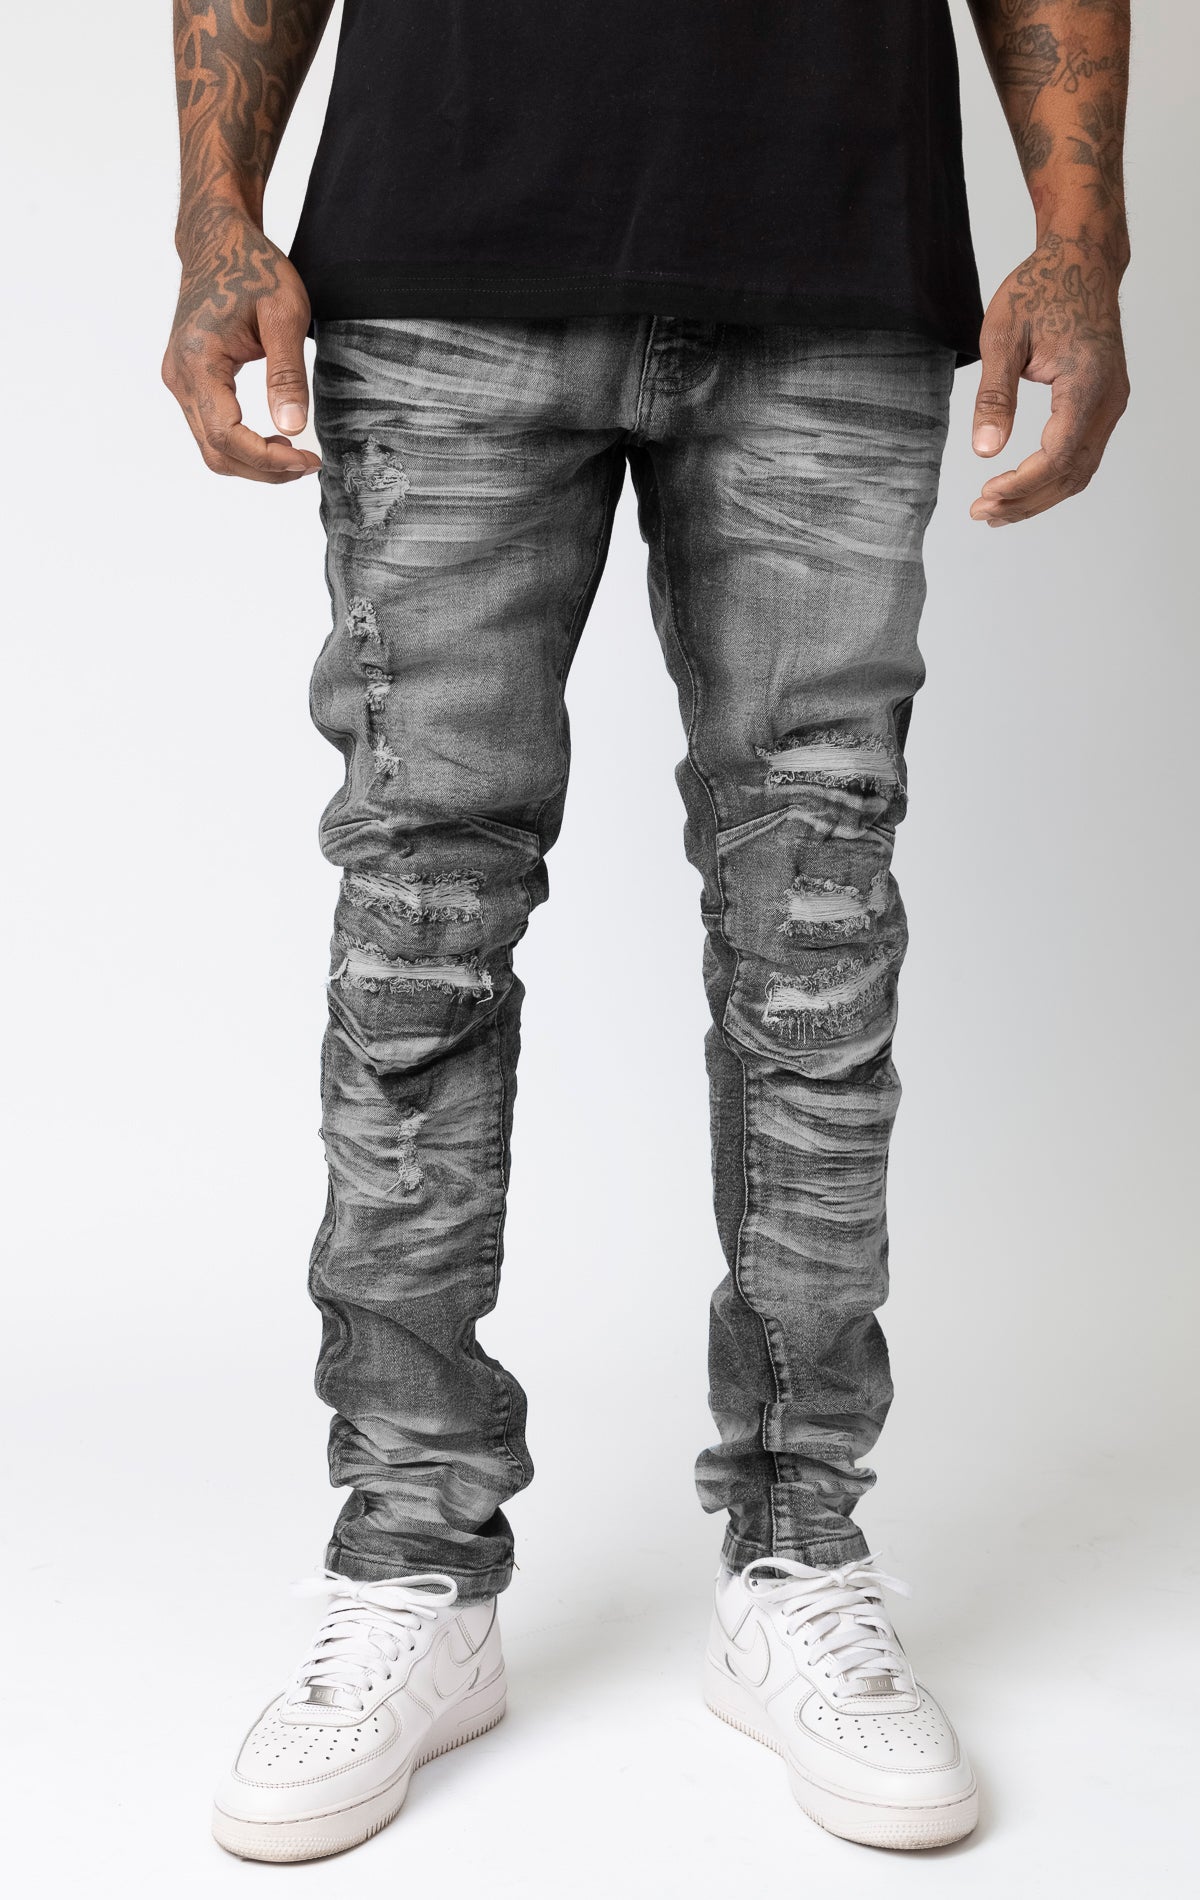 Grey Washed up slim fit denim jeans, rip and repair style.